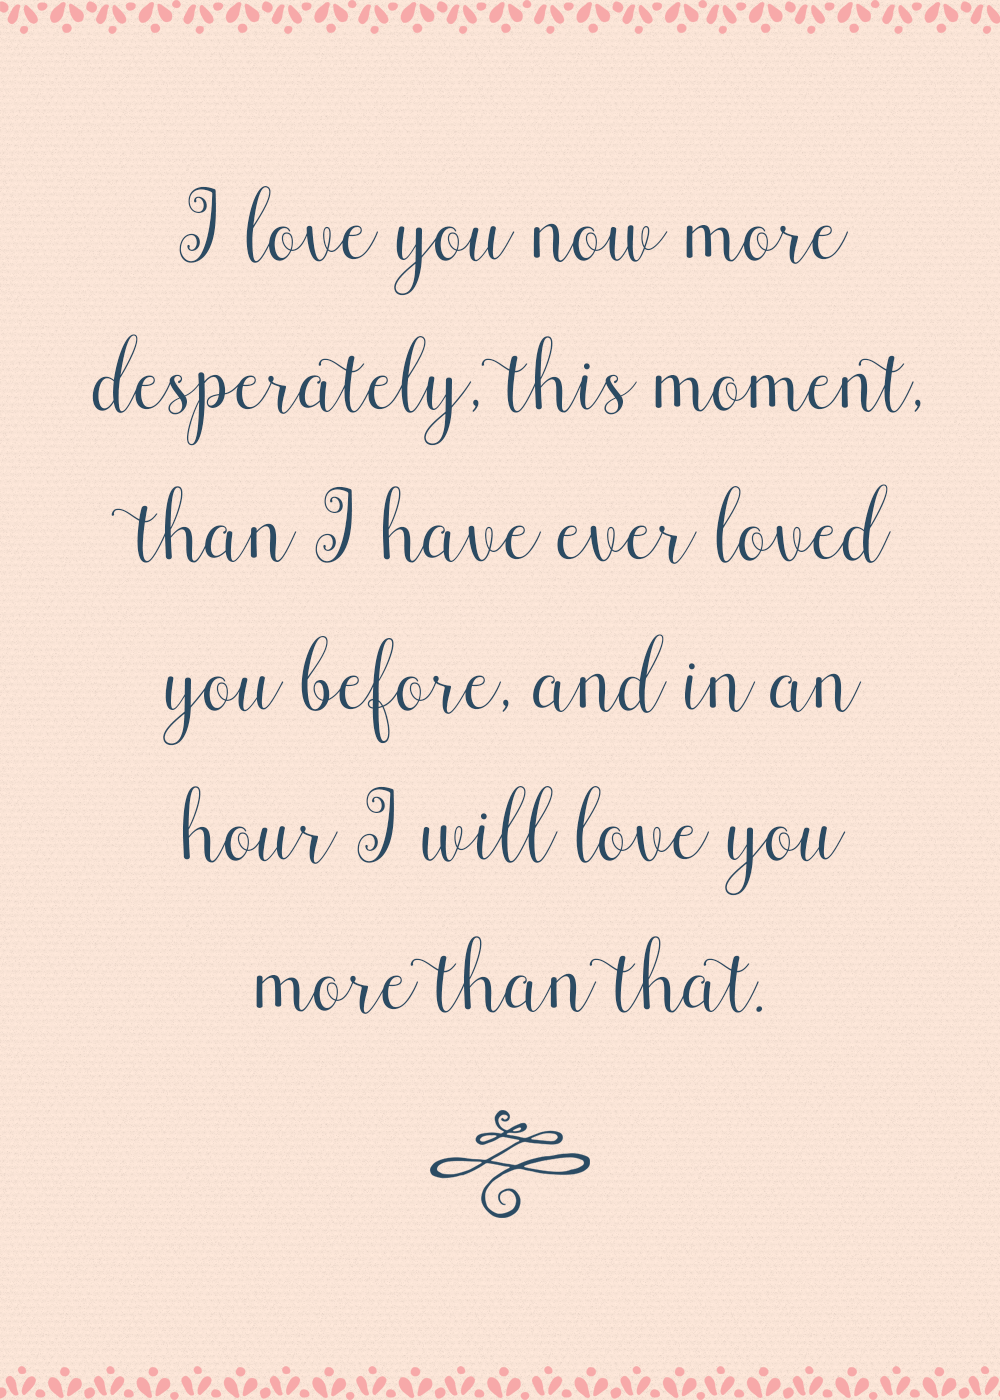 clockwork princess quote - i love you now more desperately